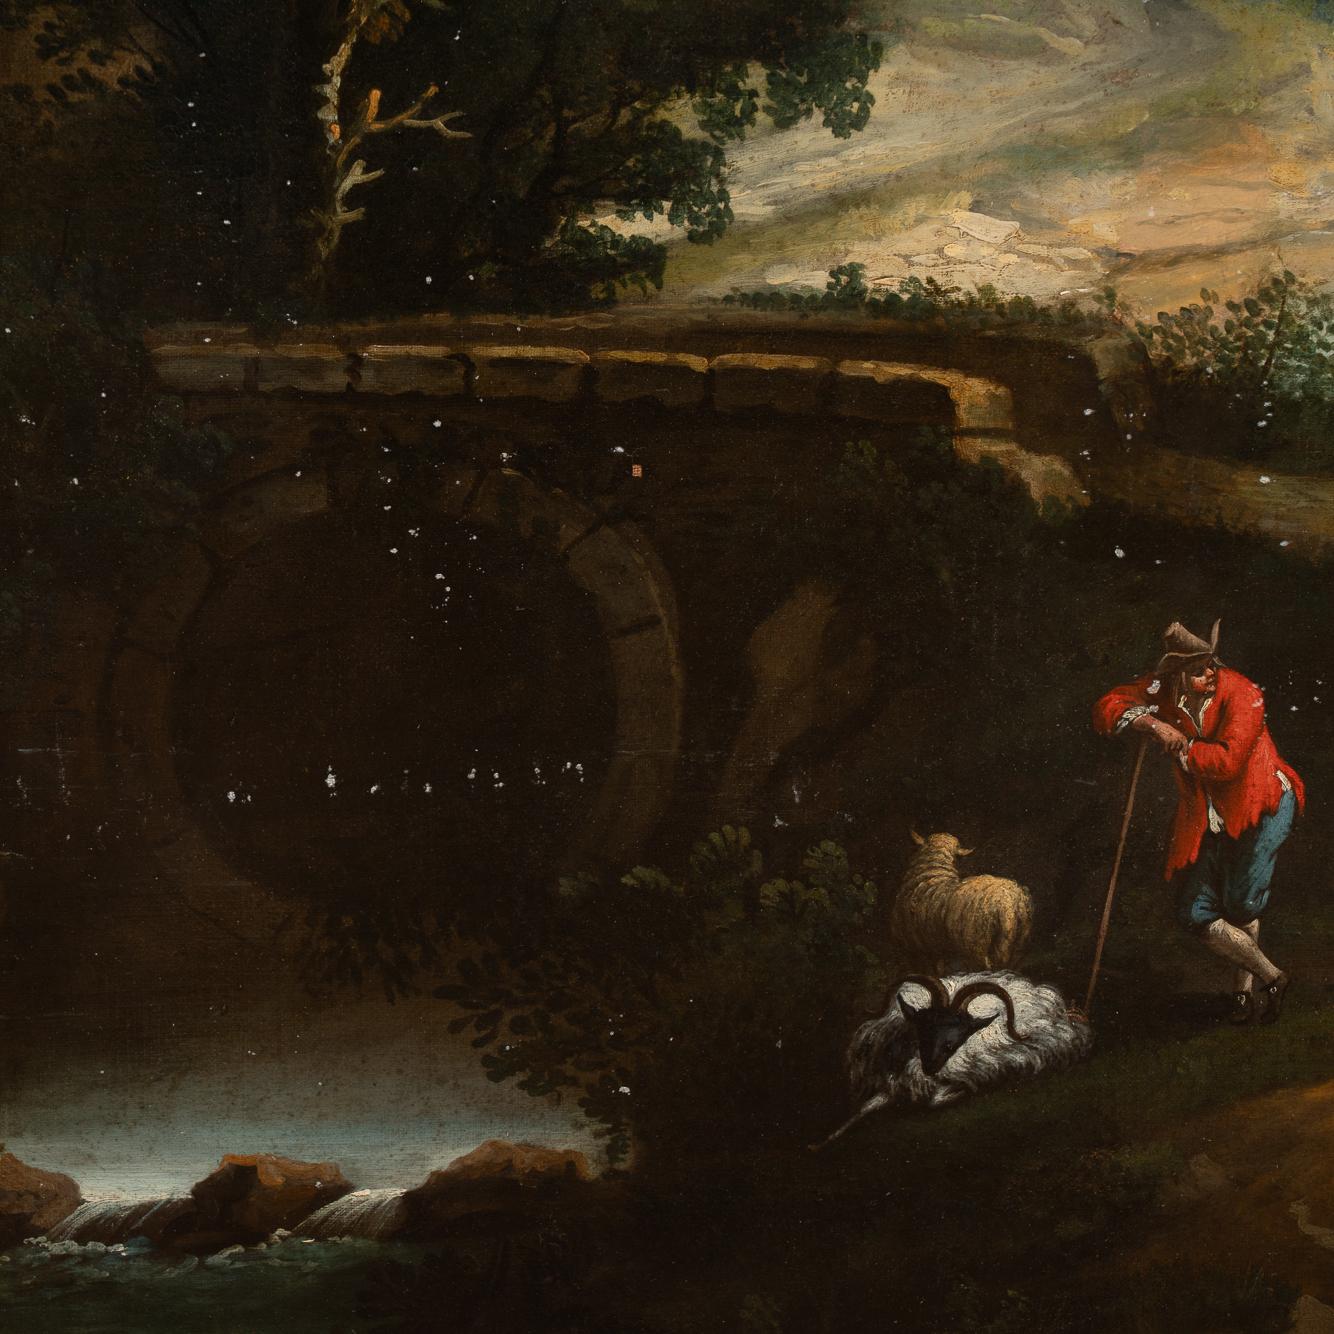 Original Oil on Canvas Painting of Shepherd at River in Evening, circa 1790-1810 3